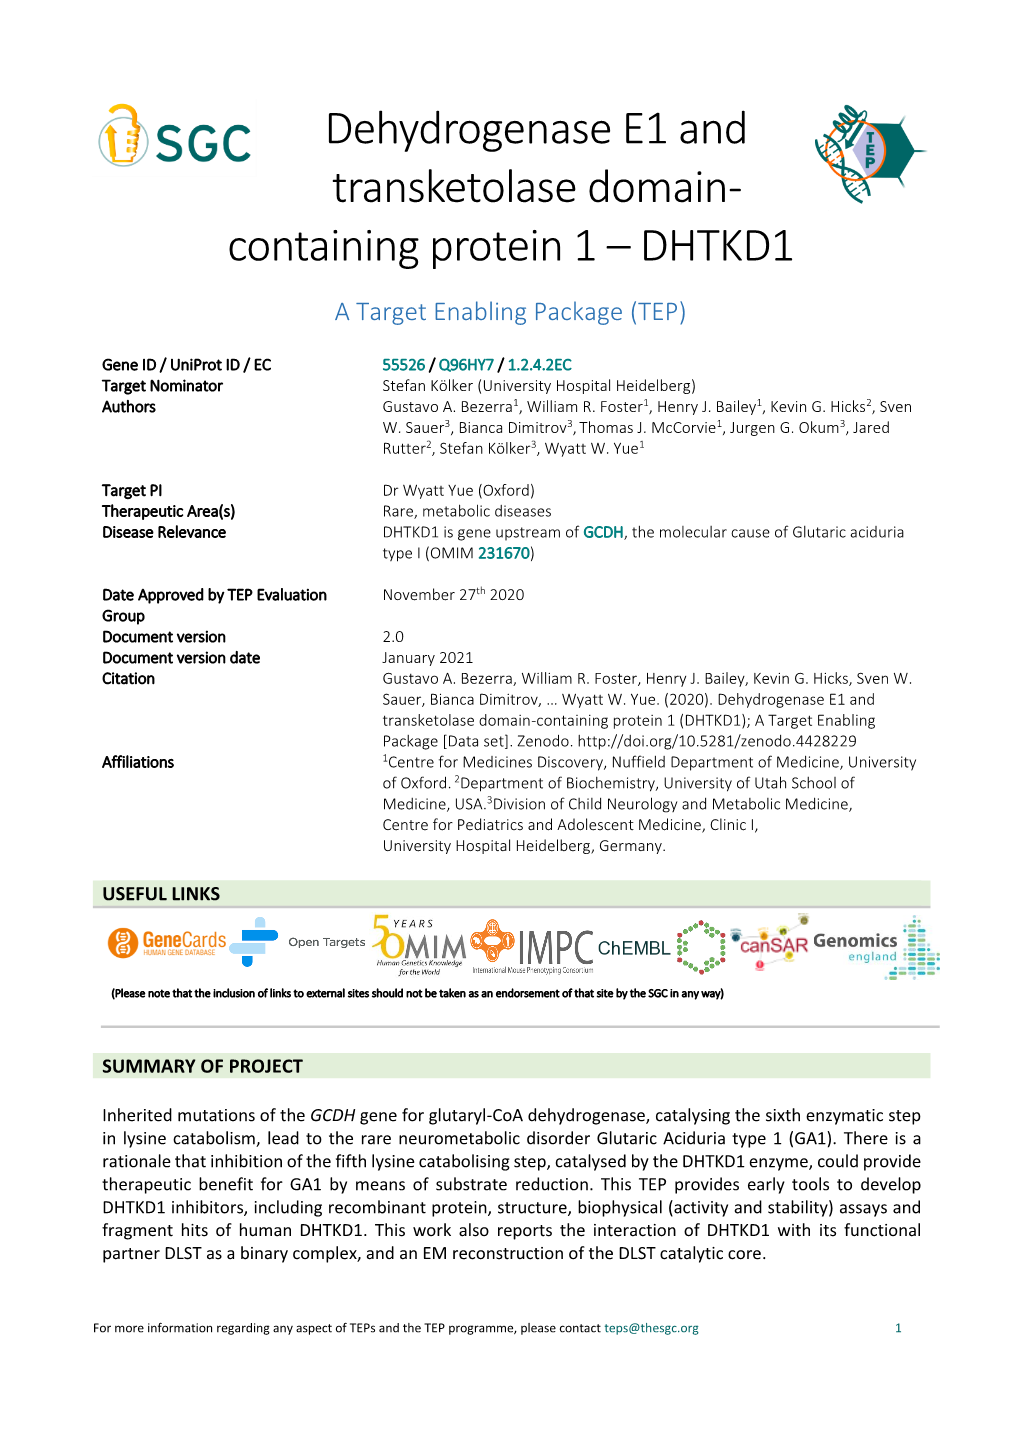 Dehydrogenase E1 and Transketolase Domain- Containing Protein 1 – DHTKD1 a Target Enabling Package (TEP)